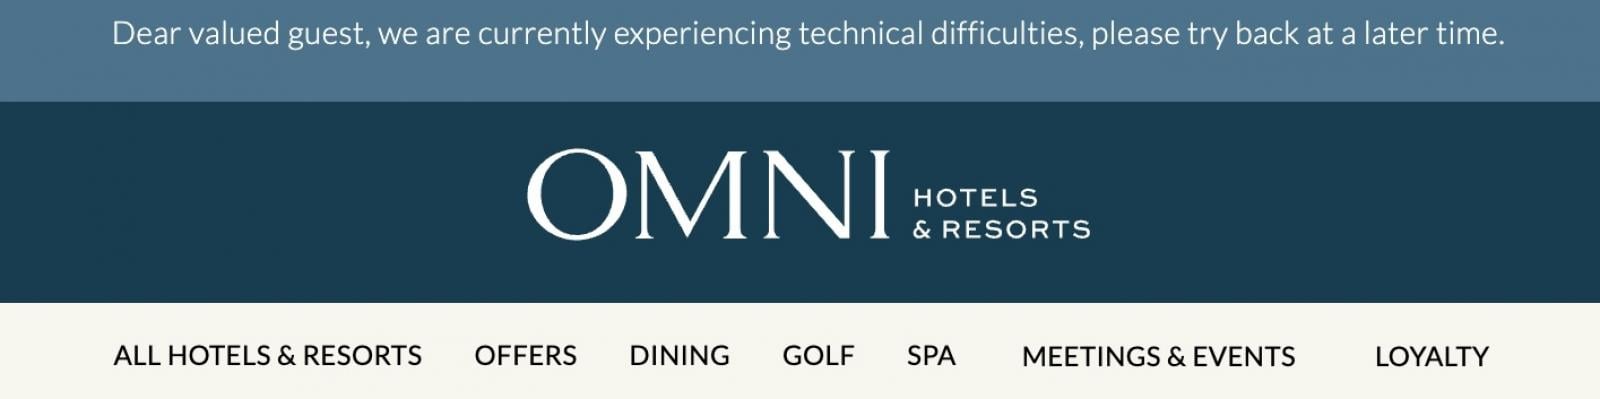 Omni Hotels outage